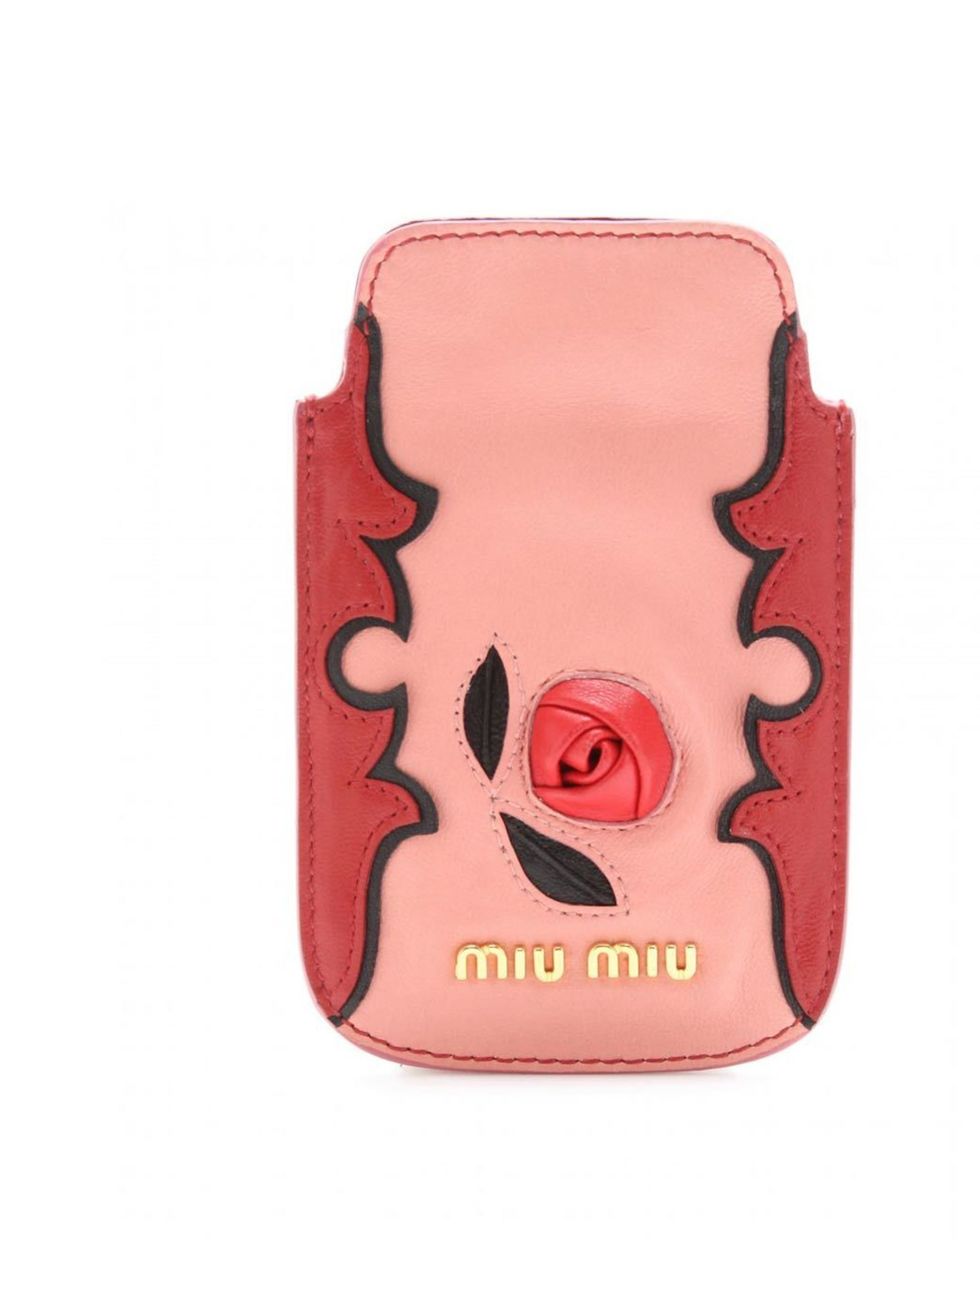 <p>Miu Miu iphone case anyone? By far the most covetable phone accessory out there, snap it up before every fashion editor does Miu Miu leather iPhone case, £120, at Mytheresa</p><p><a href="http://shopping.elleuk.com/browse?fts=miu+miu+iphone">BUY NOW  